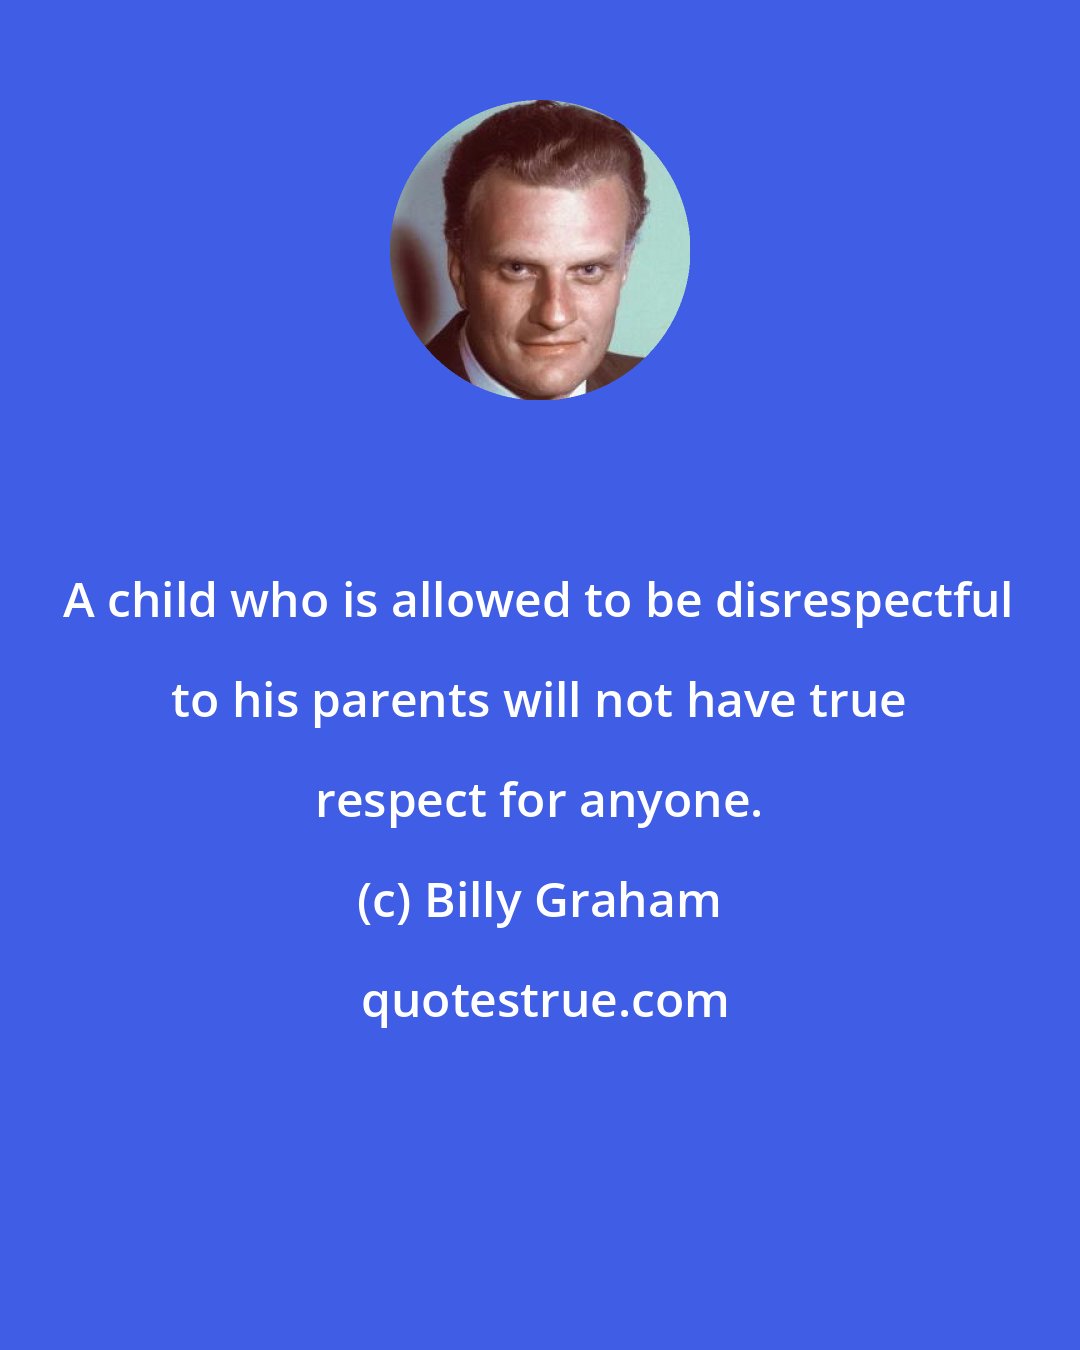 Billy Graham: A child who is allowed to be disrespectful to his parents will not have true respect for anyone.